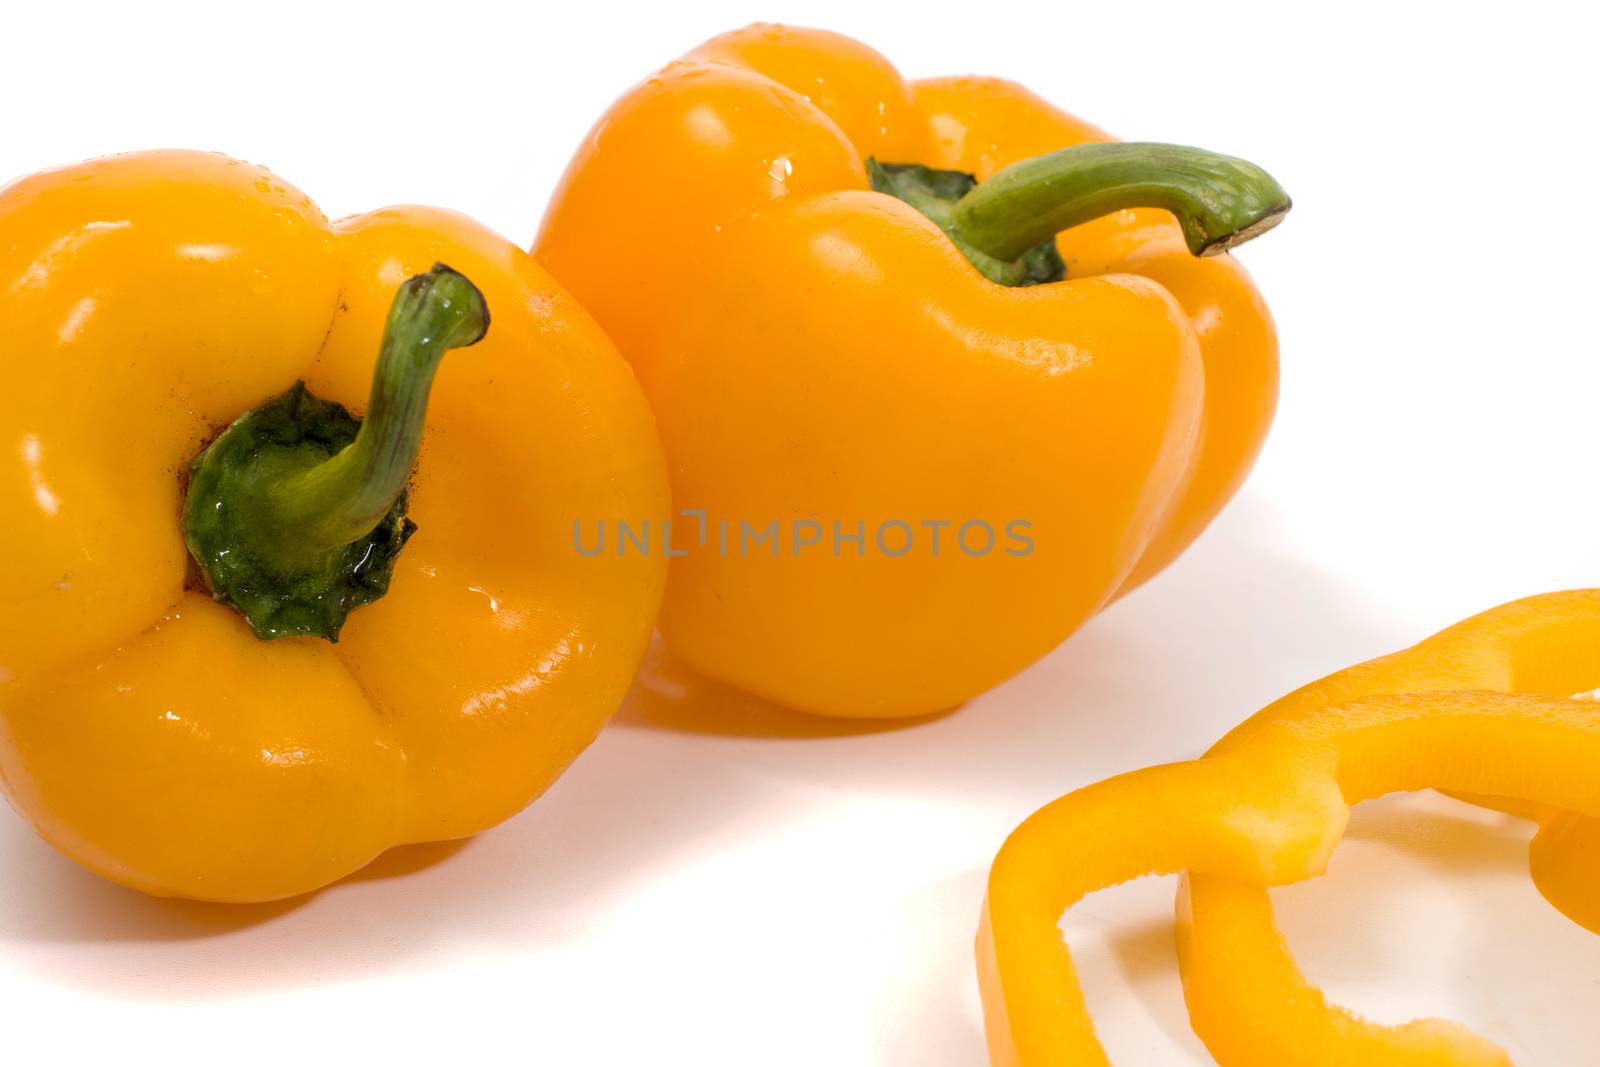 yellow bell peppers isolated on a white background.